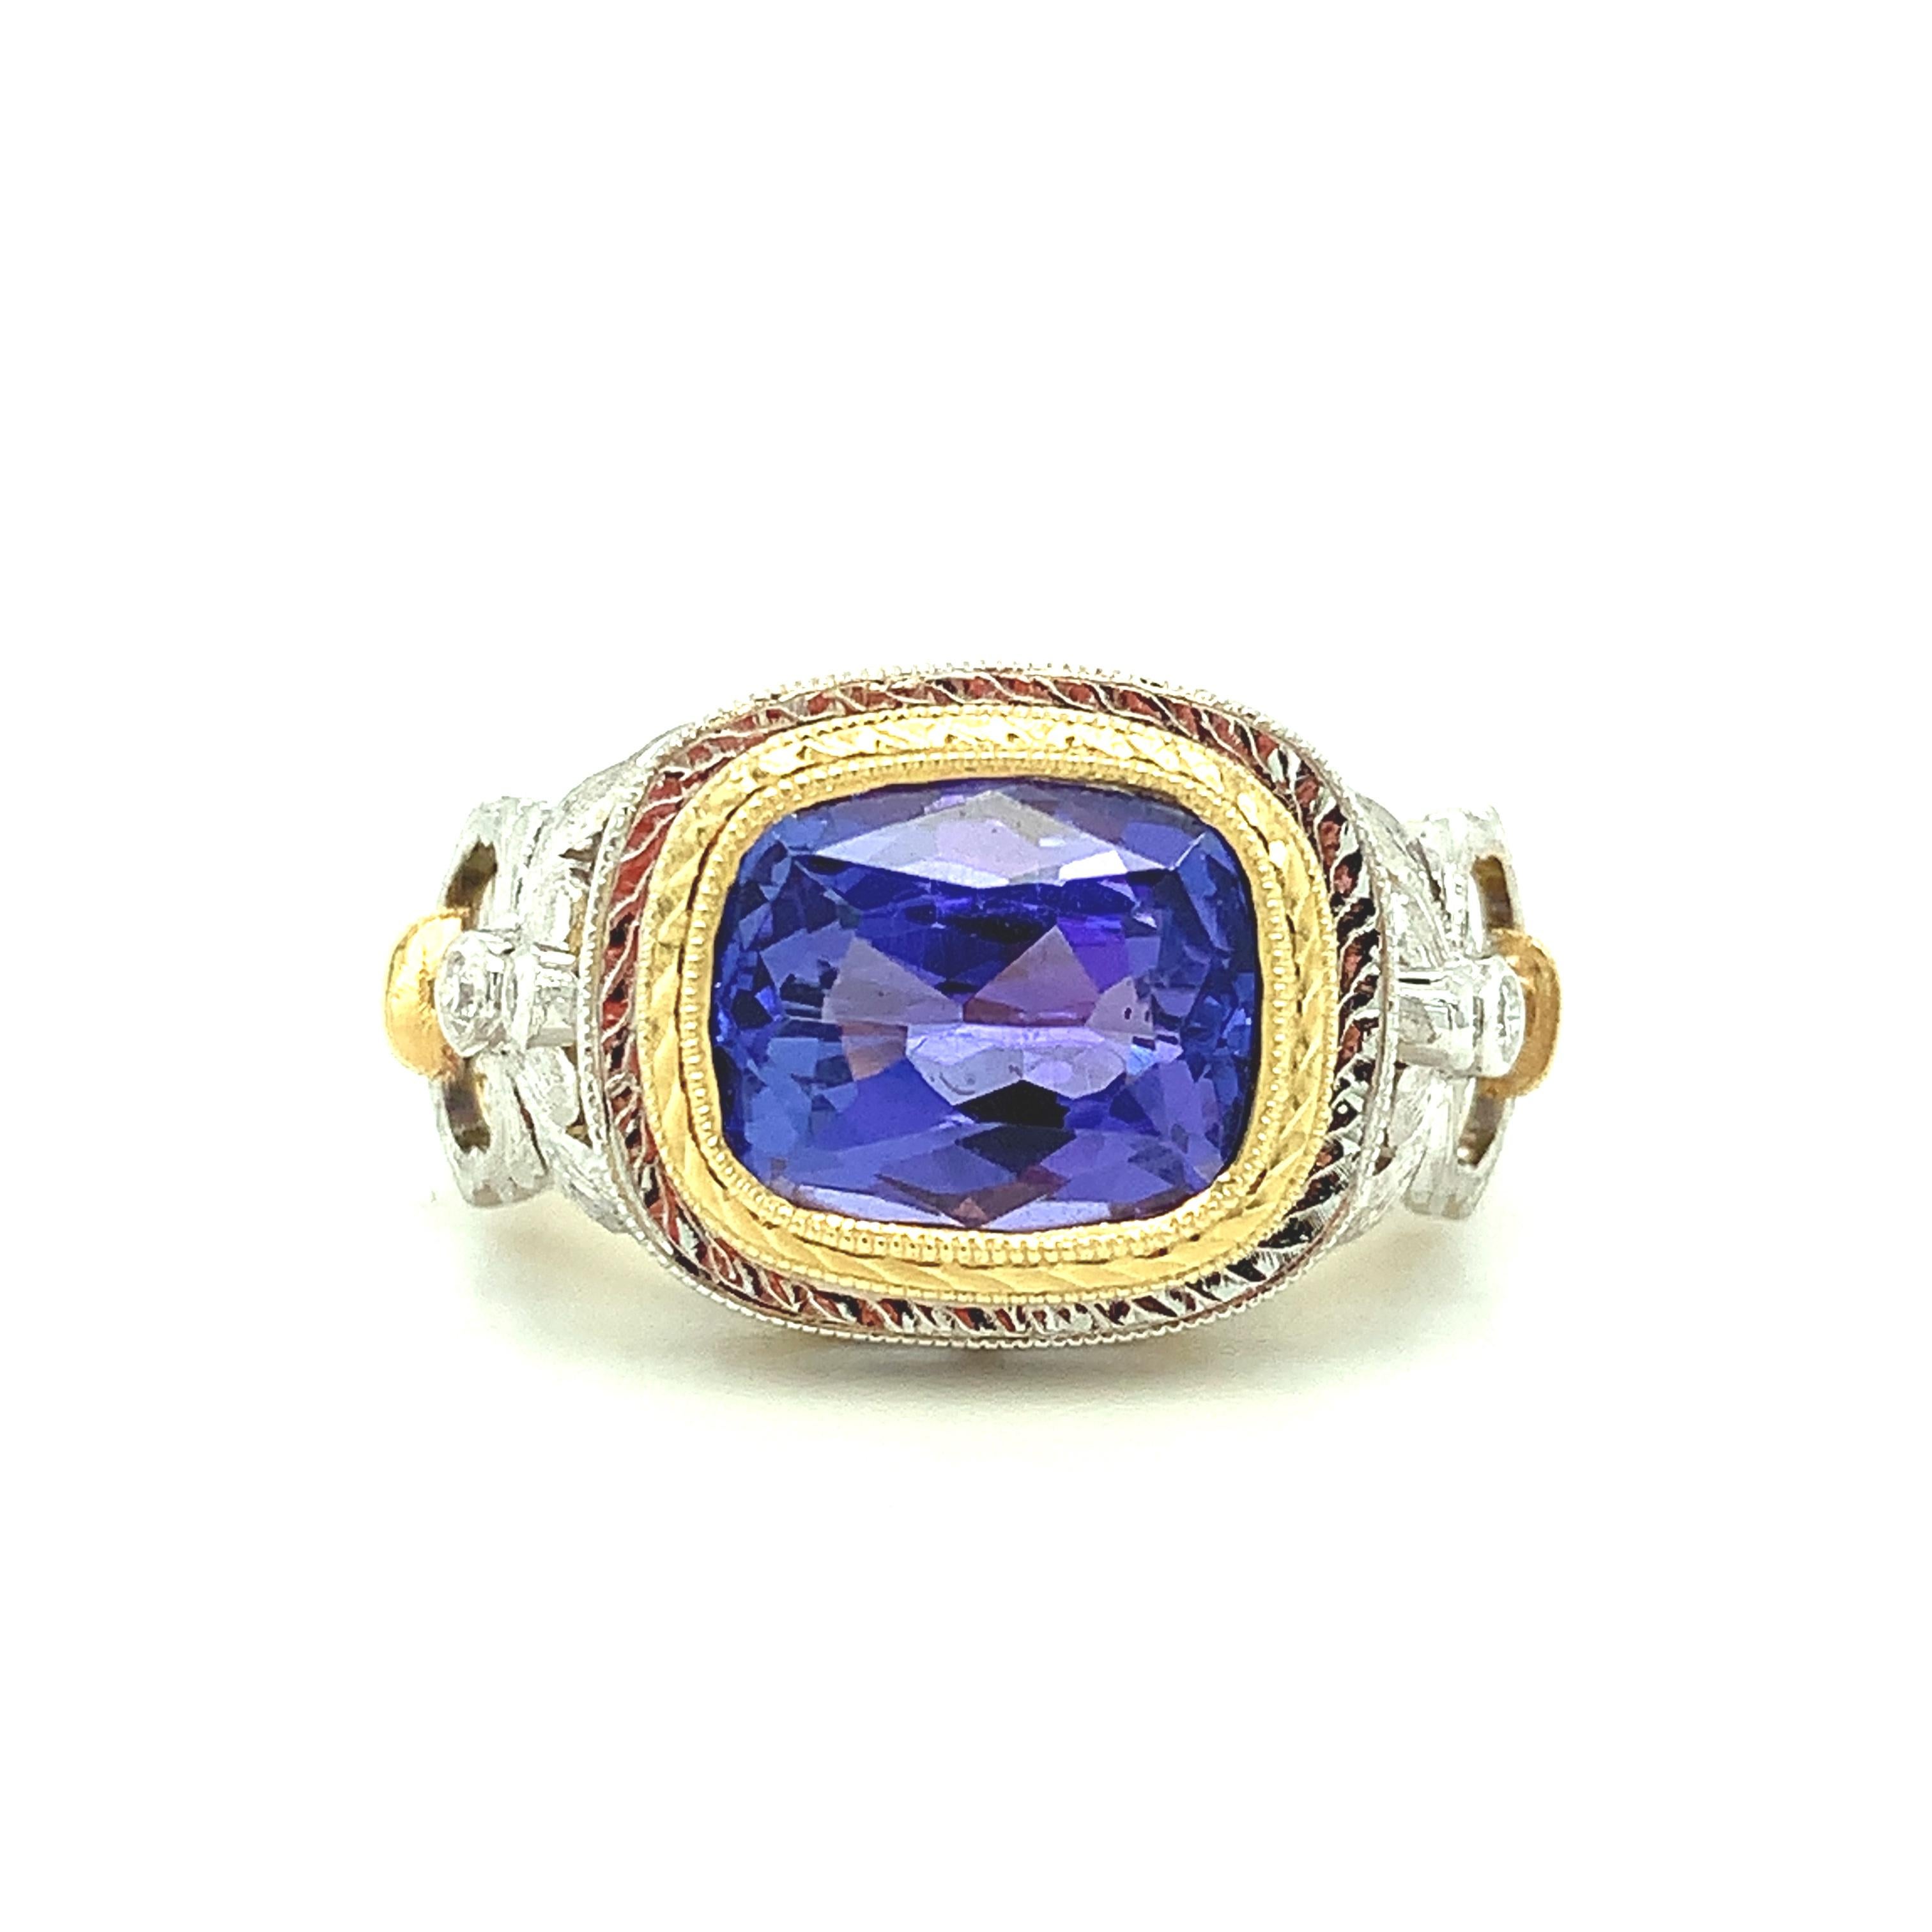 Cushion Cut 4.04 Carat Tanzanite and Diamond Cocktail Ring, Handmade in 18k Gold For Sale